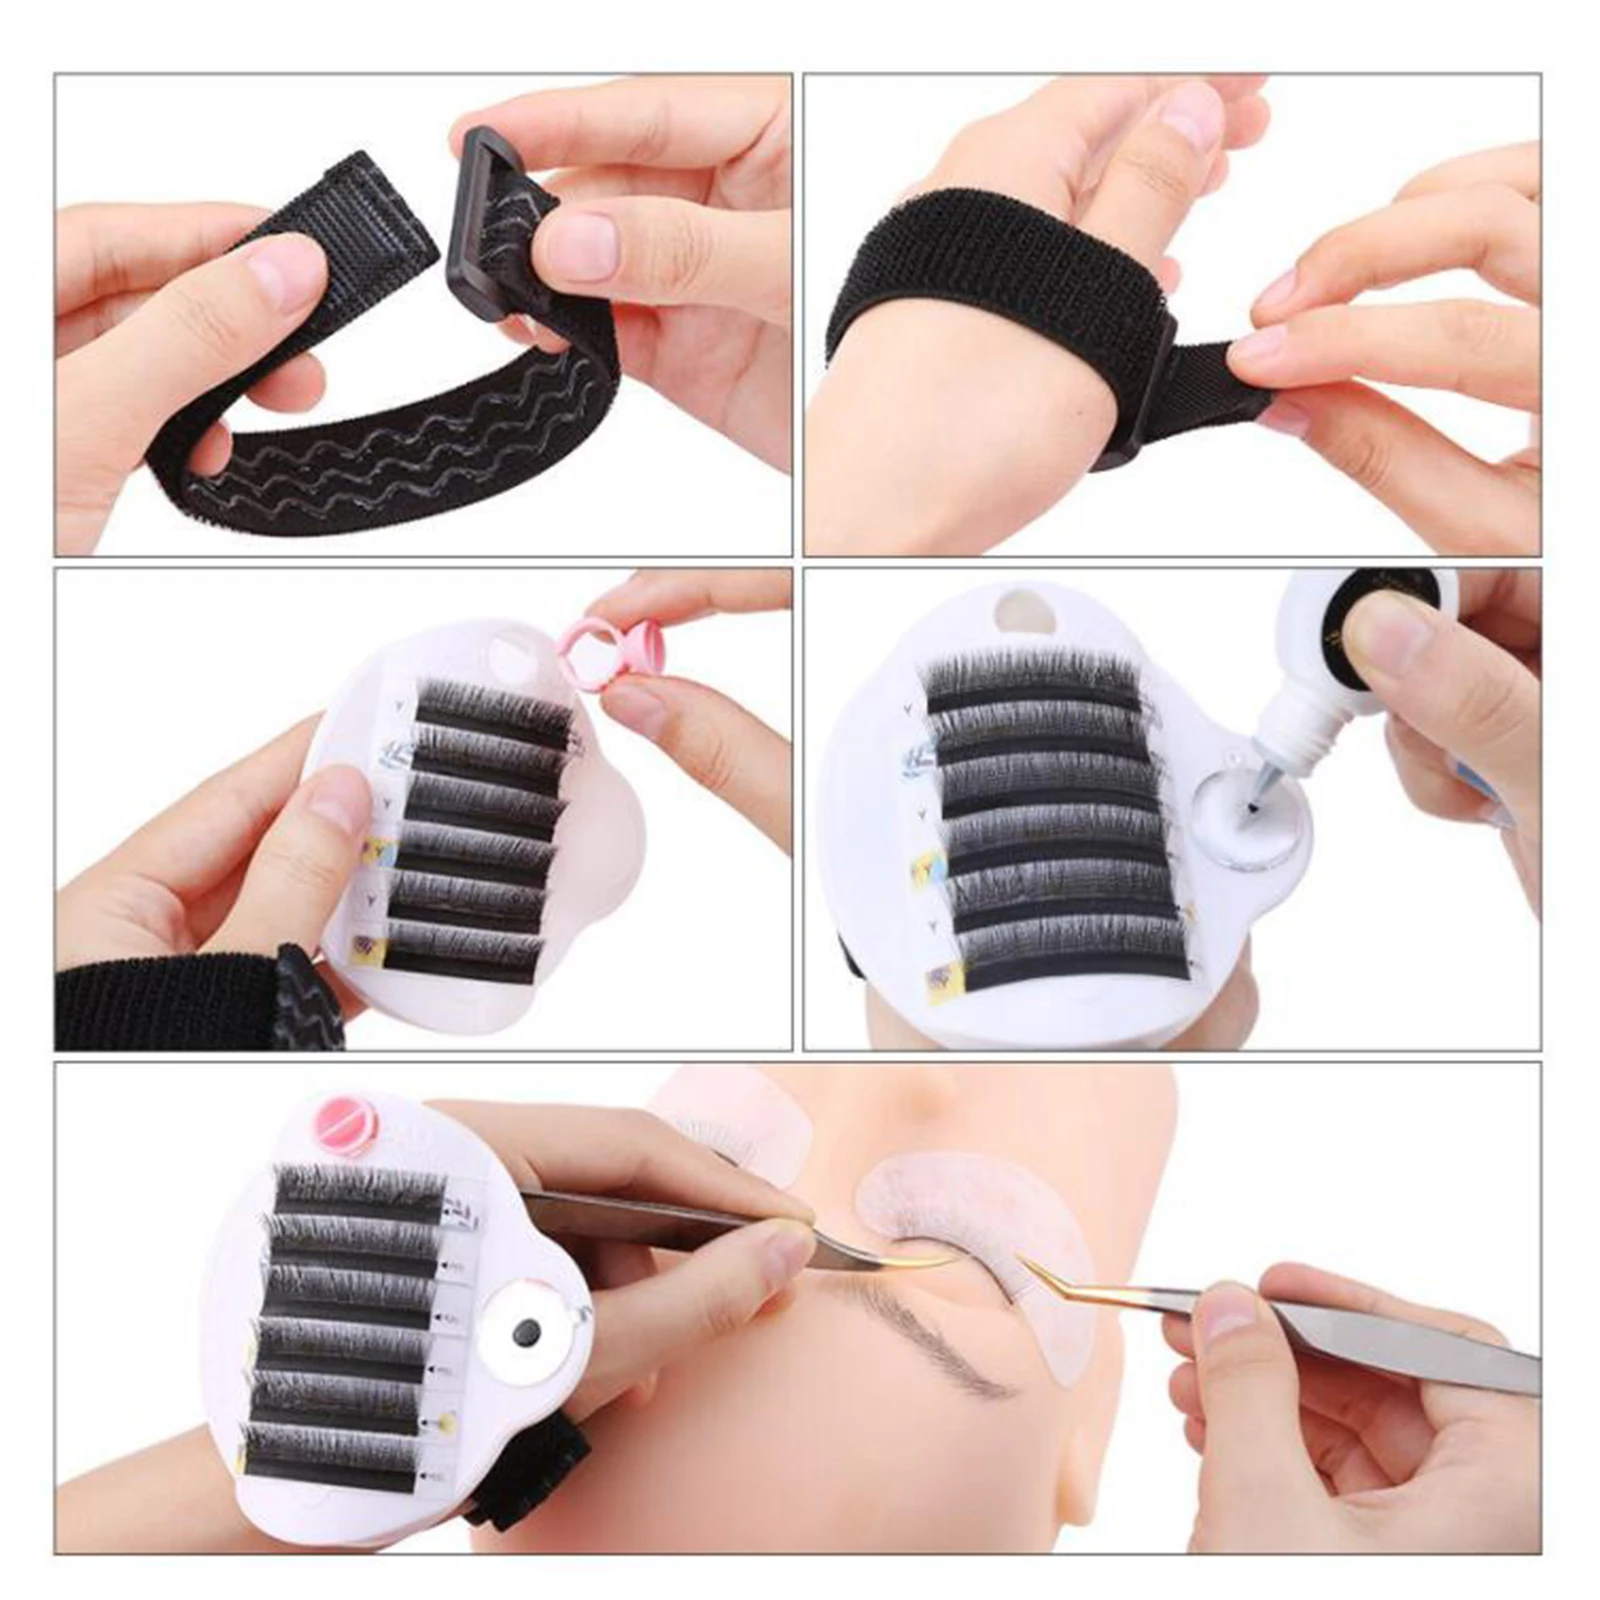 Professional Eyelash Extension Hand Plate Tray with Wrist Strap Plastic Hand Plate Palette Tray Eye Lash Holder